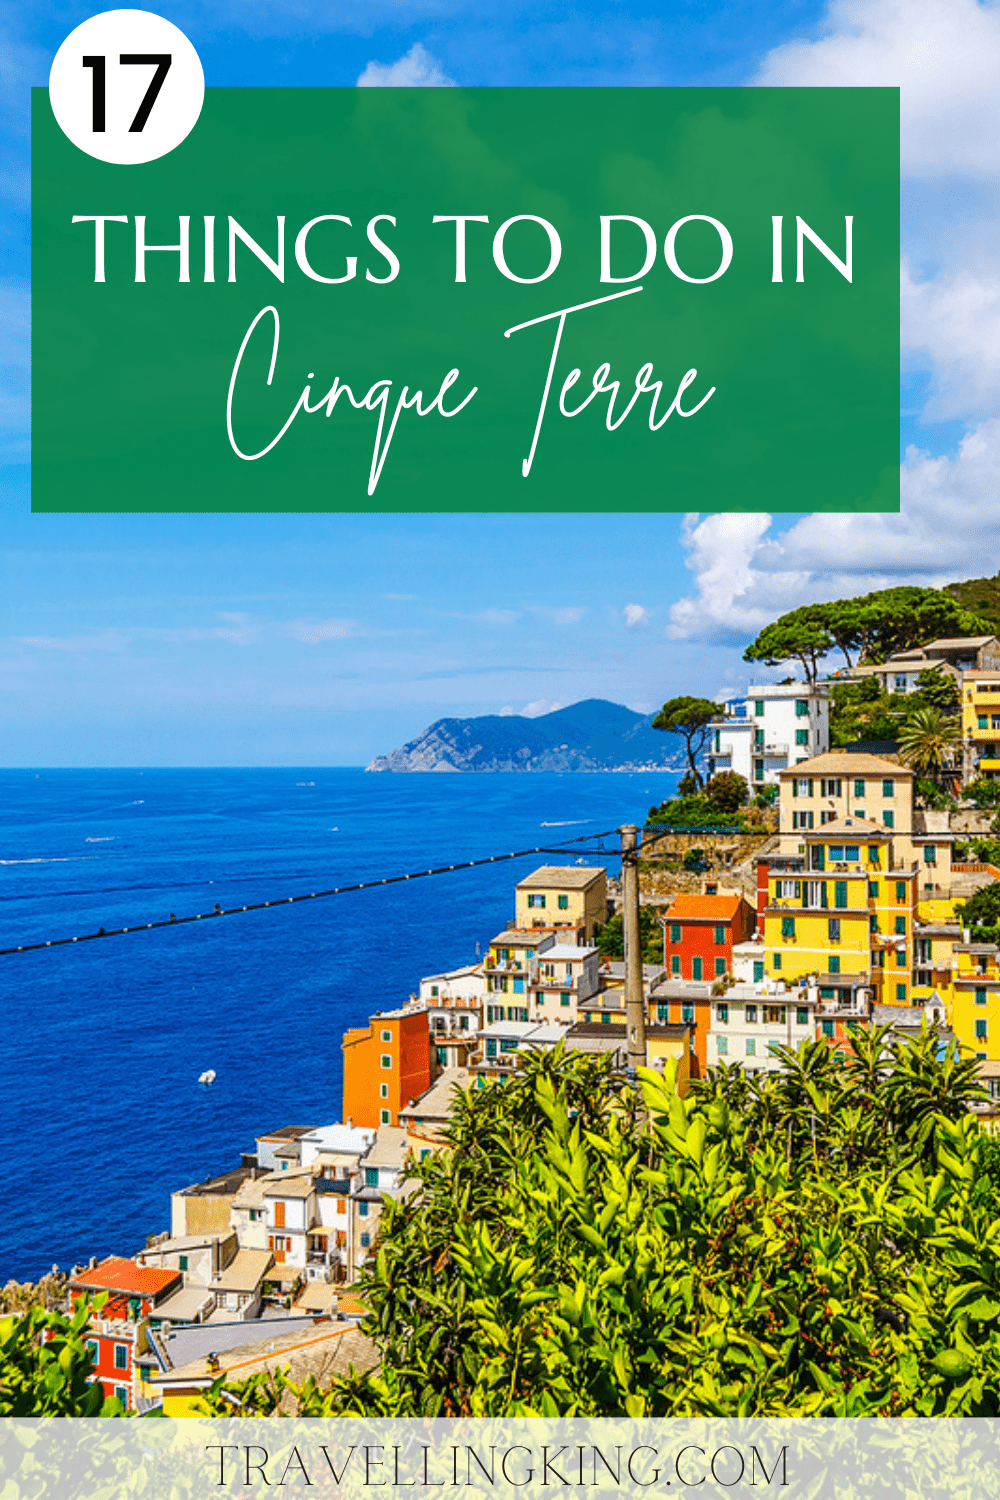 17 Things to do in Cinque Terre